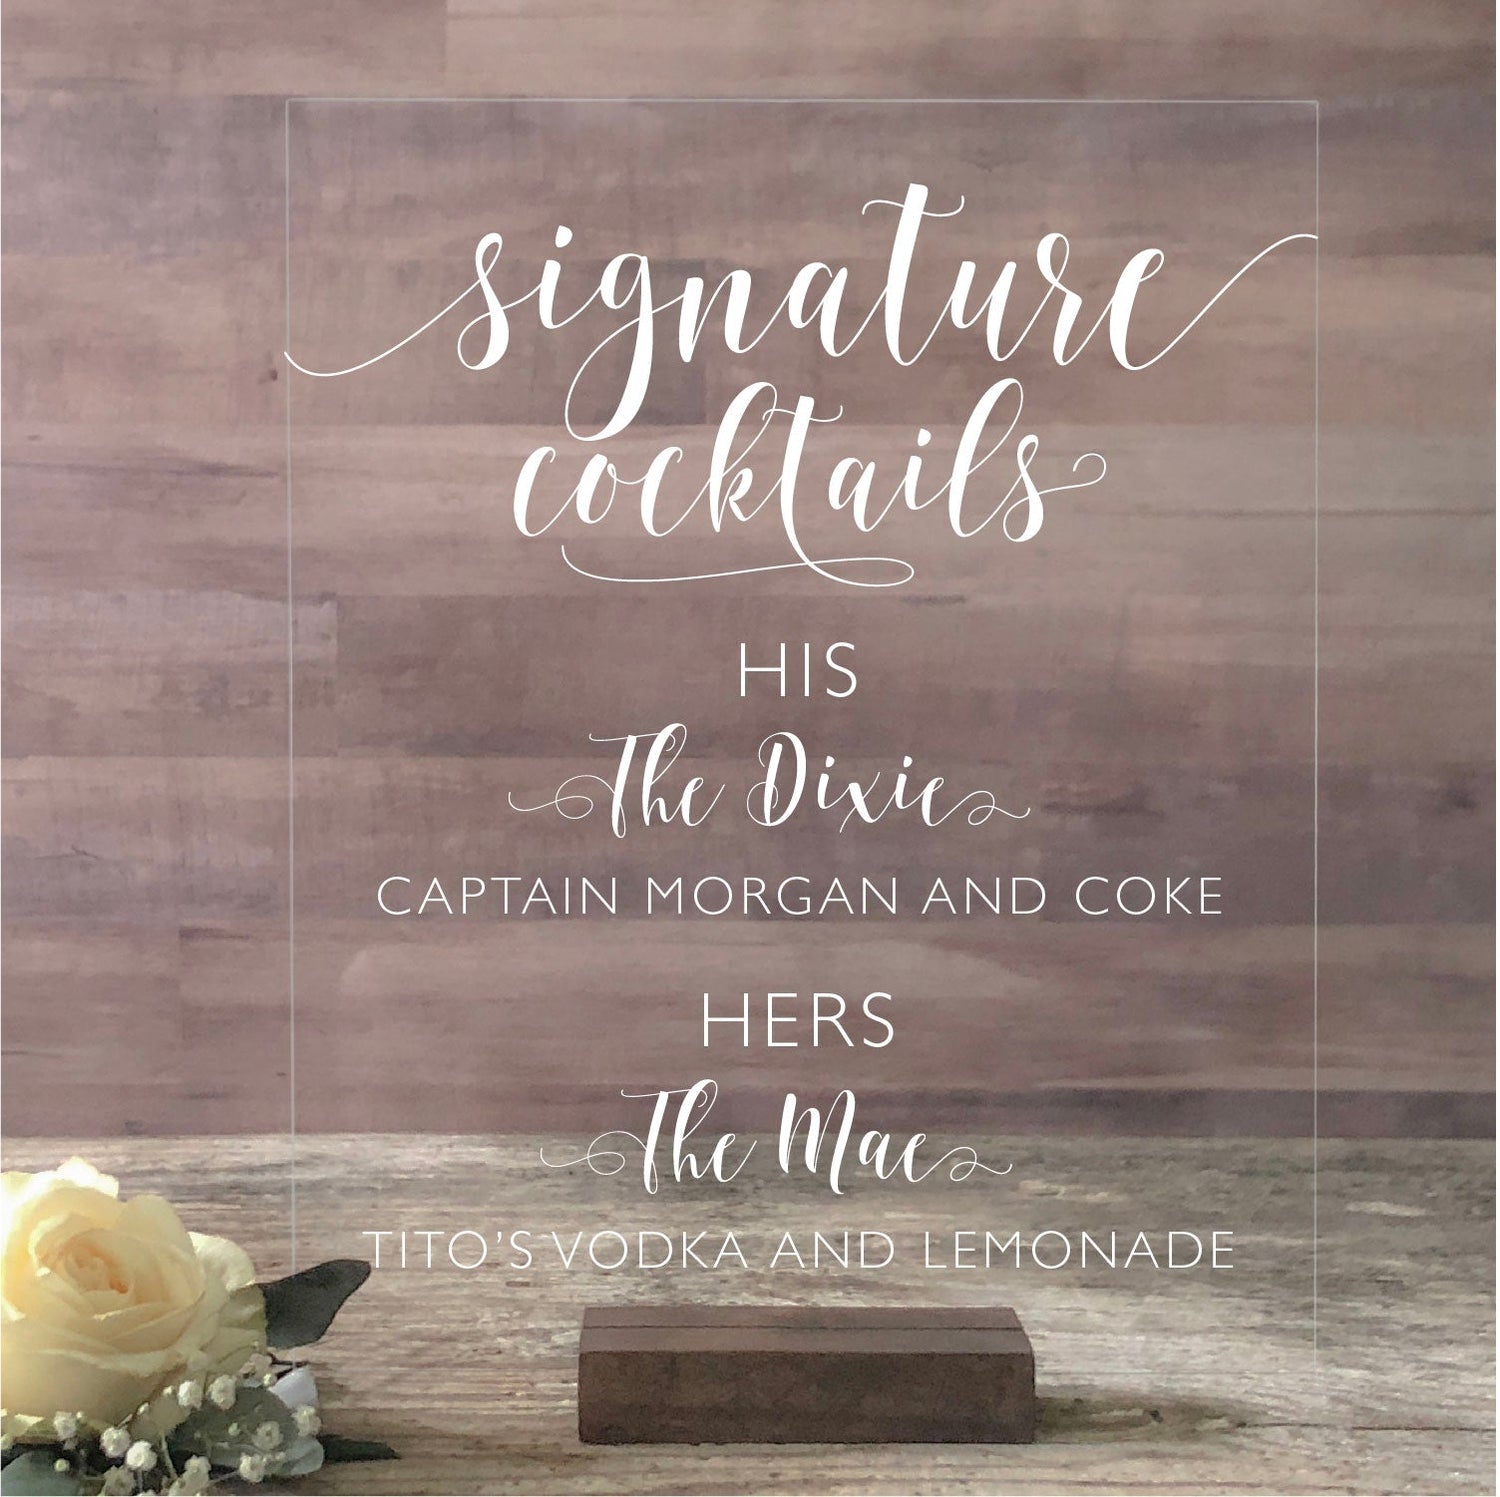 Acrylic Signature Cocktails Sign | Lucite Wedding Decor | AS-8 - SCC Signs